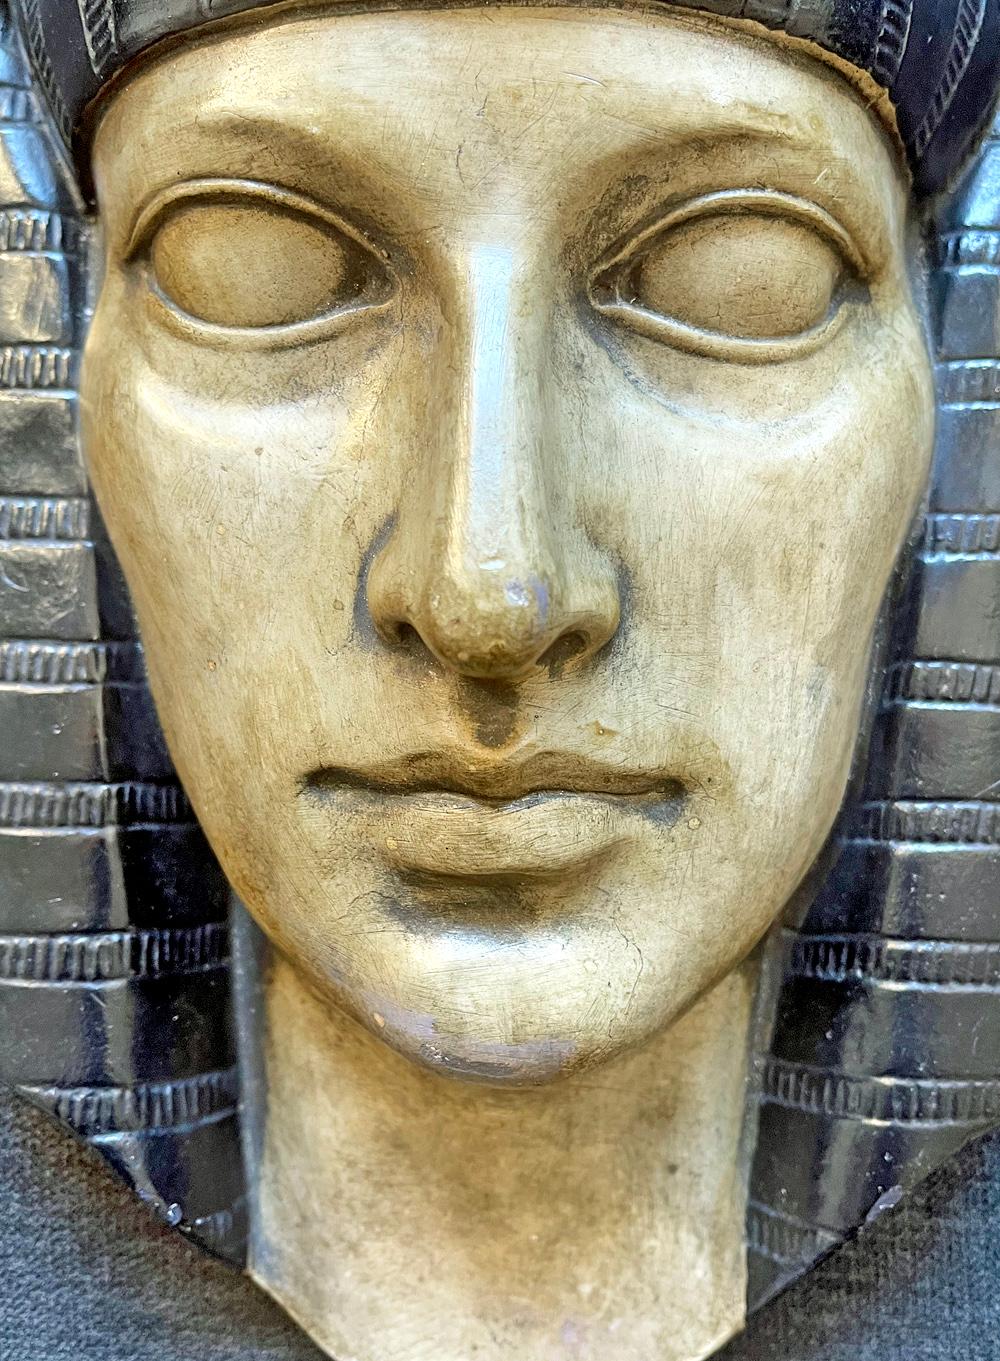 Beautifully sculpted and finished, this wall-mounted sculpture depicts the head of a Pharaoh, handsomely depicted with full lips and wide eyes, surmounted by a Classic Egyptian headdress with a winged scarab. The sculpture is molded plaster painted